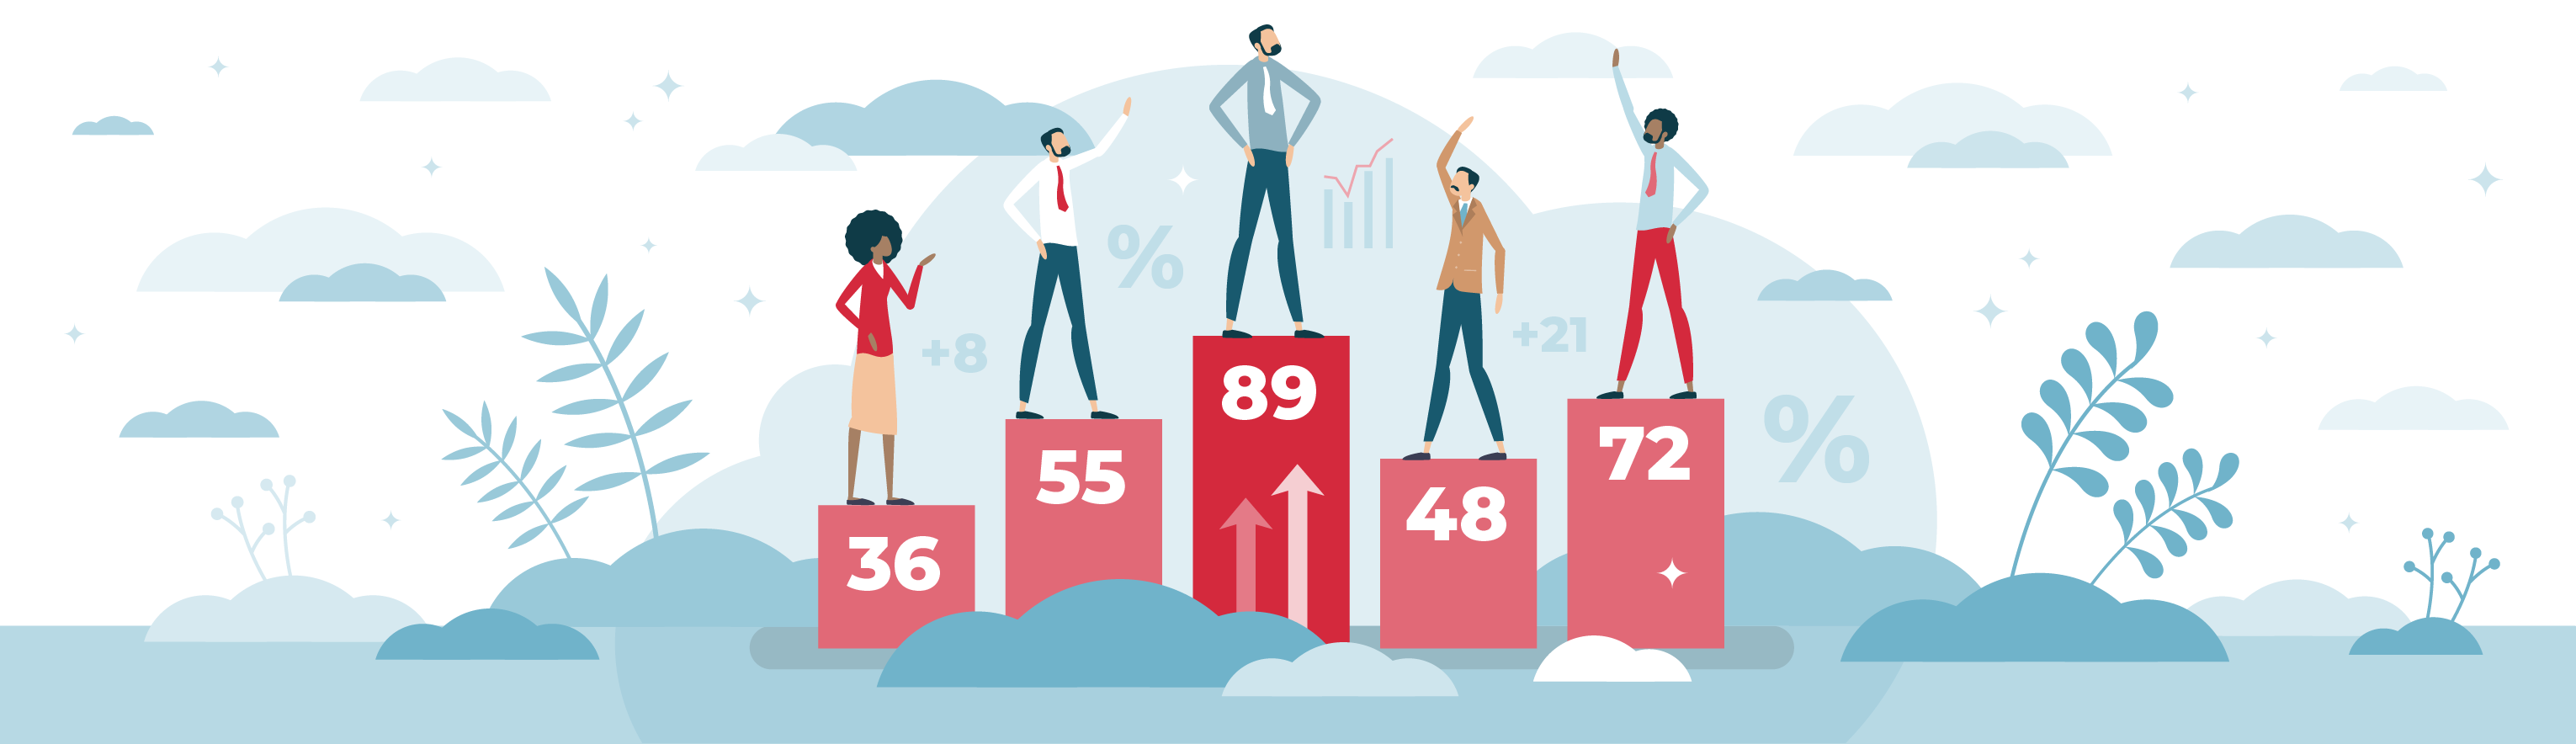 The Benefits of Lead Scoring for B2B: The Complete List